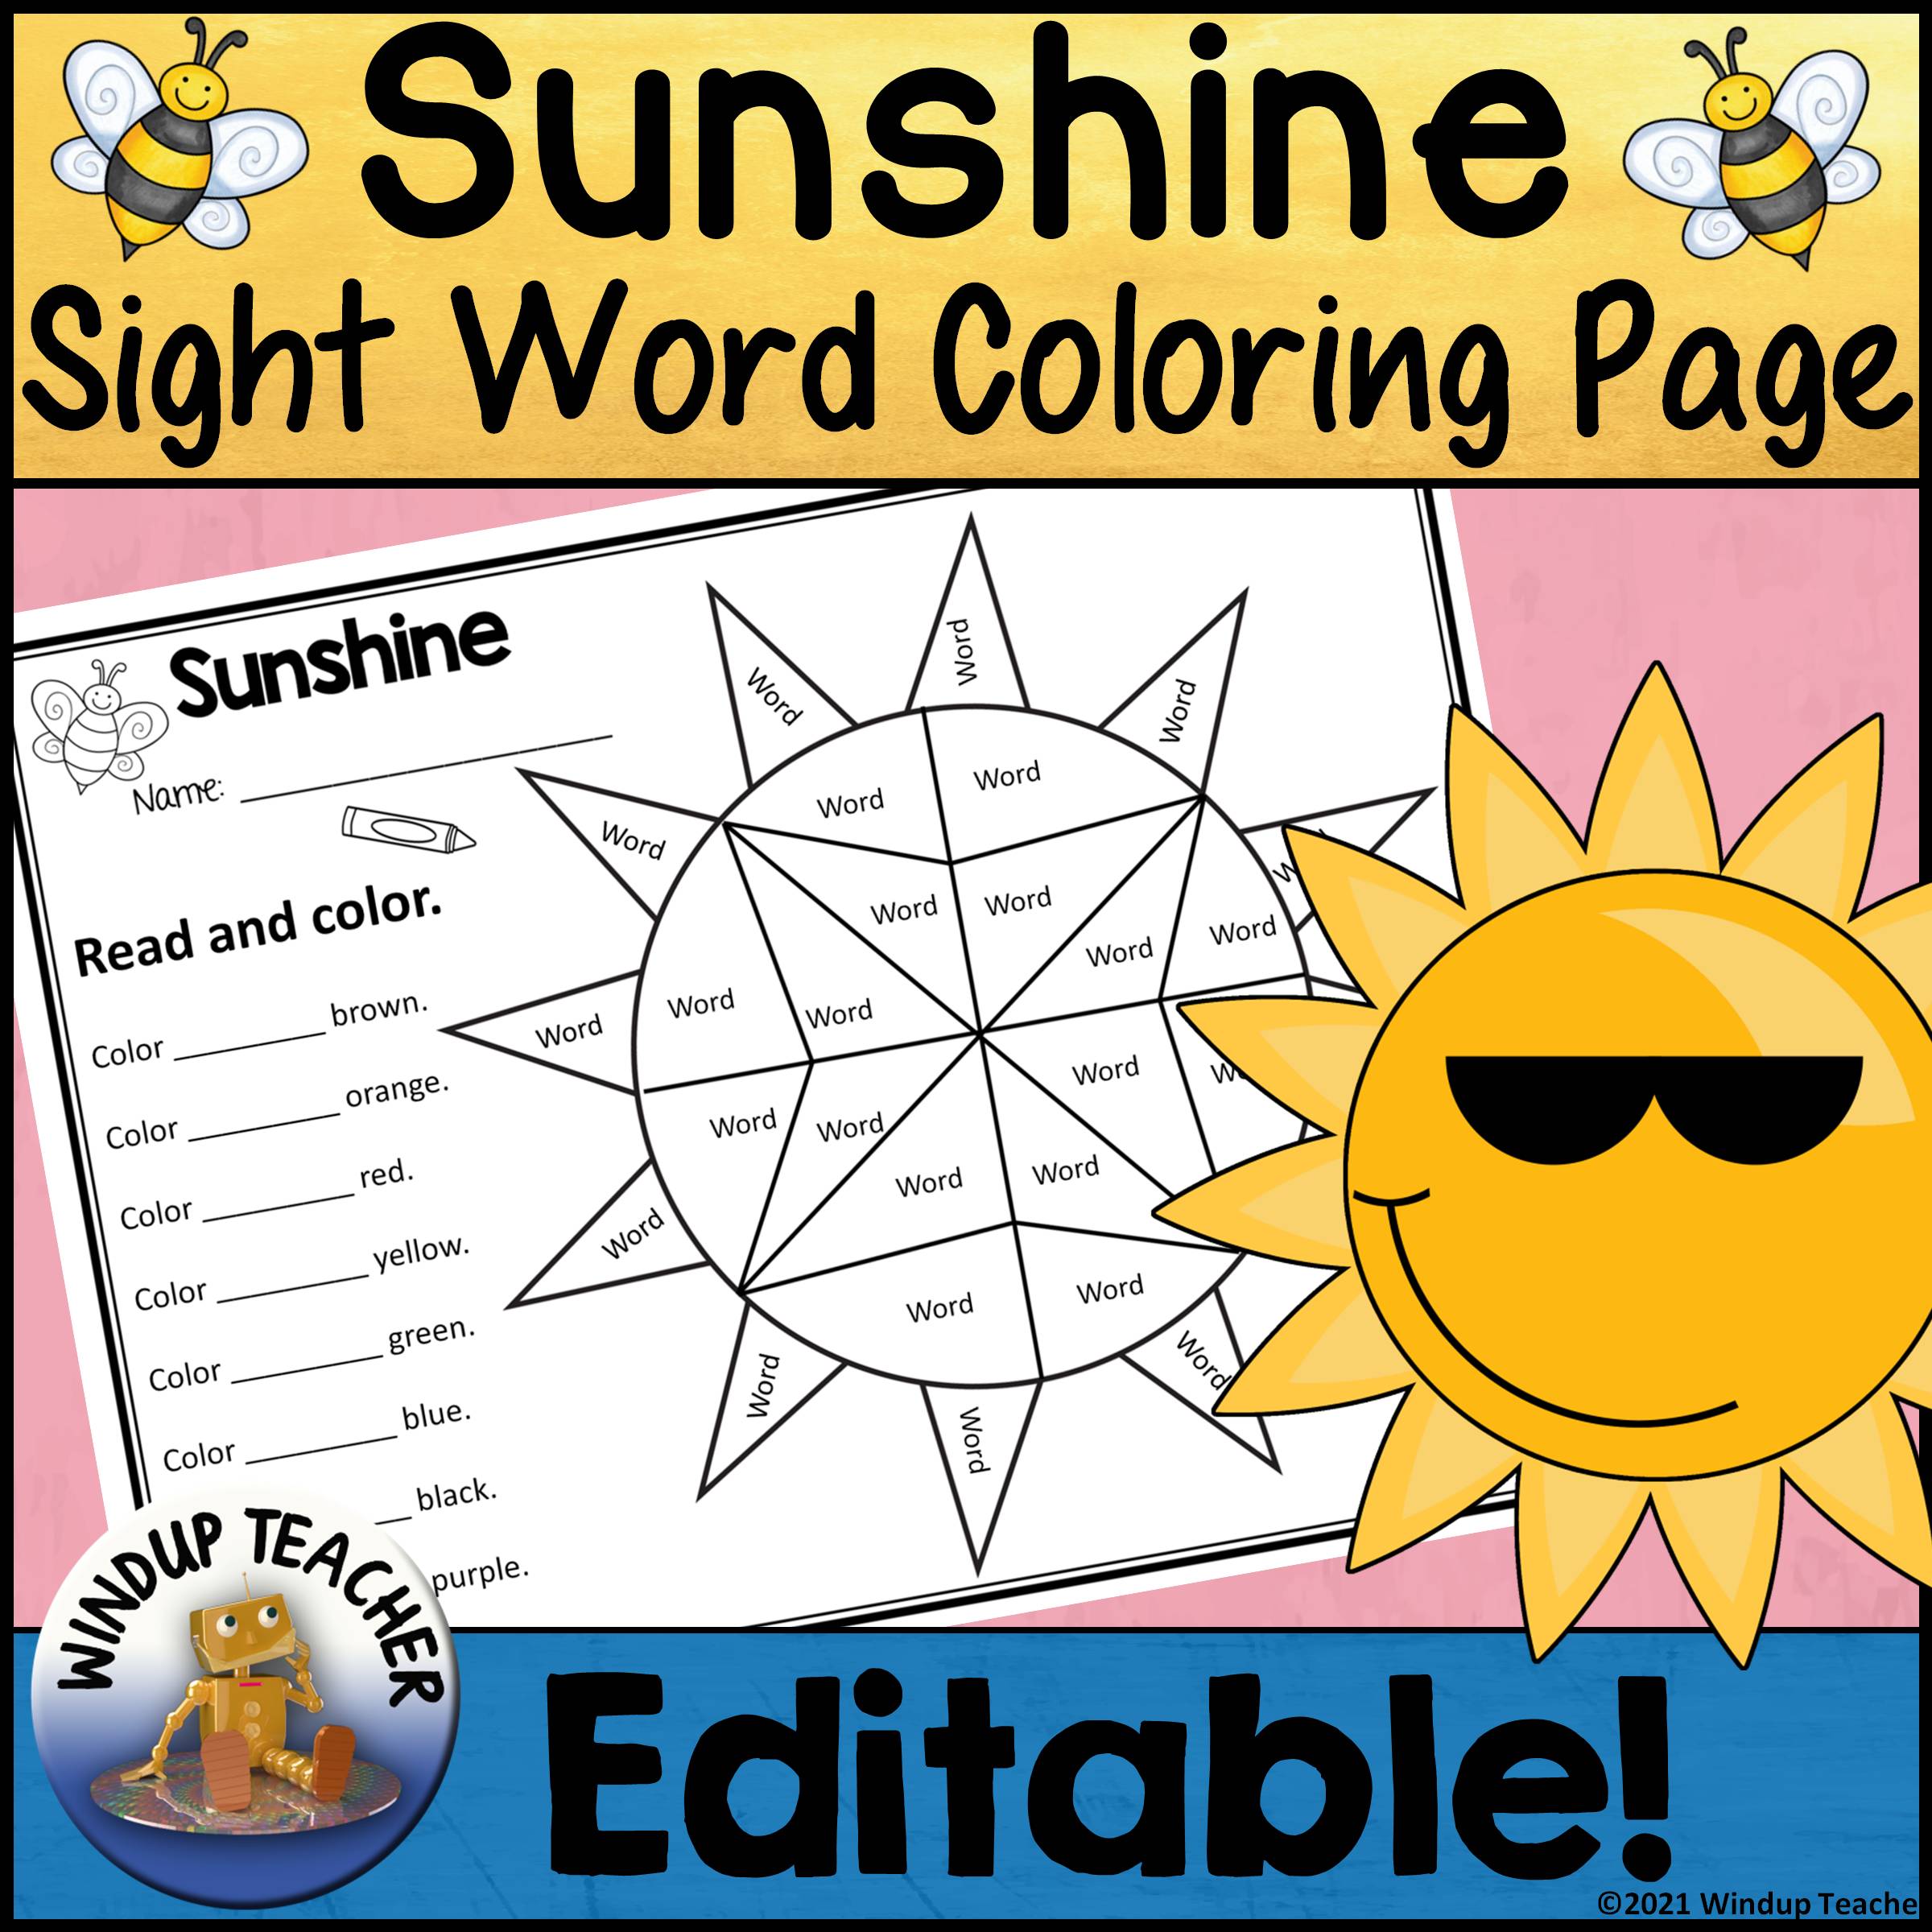 Spring color by sight word activity sheet